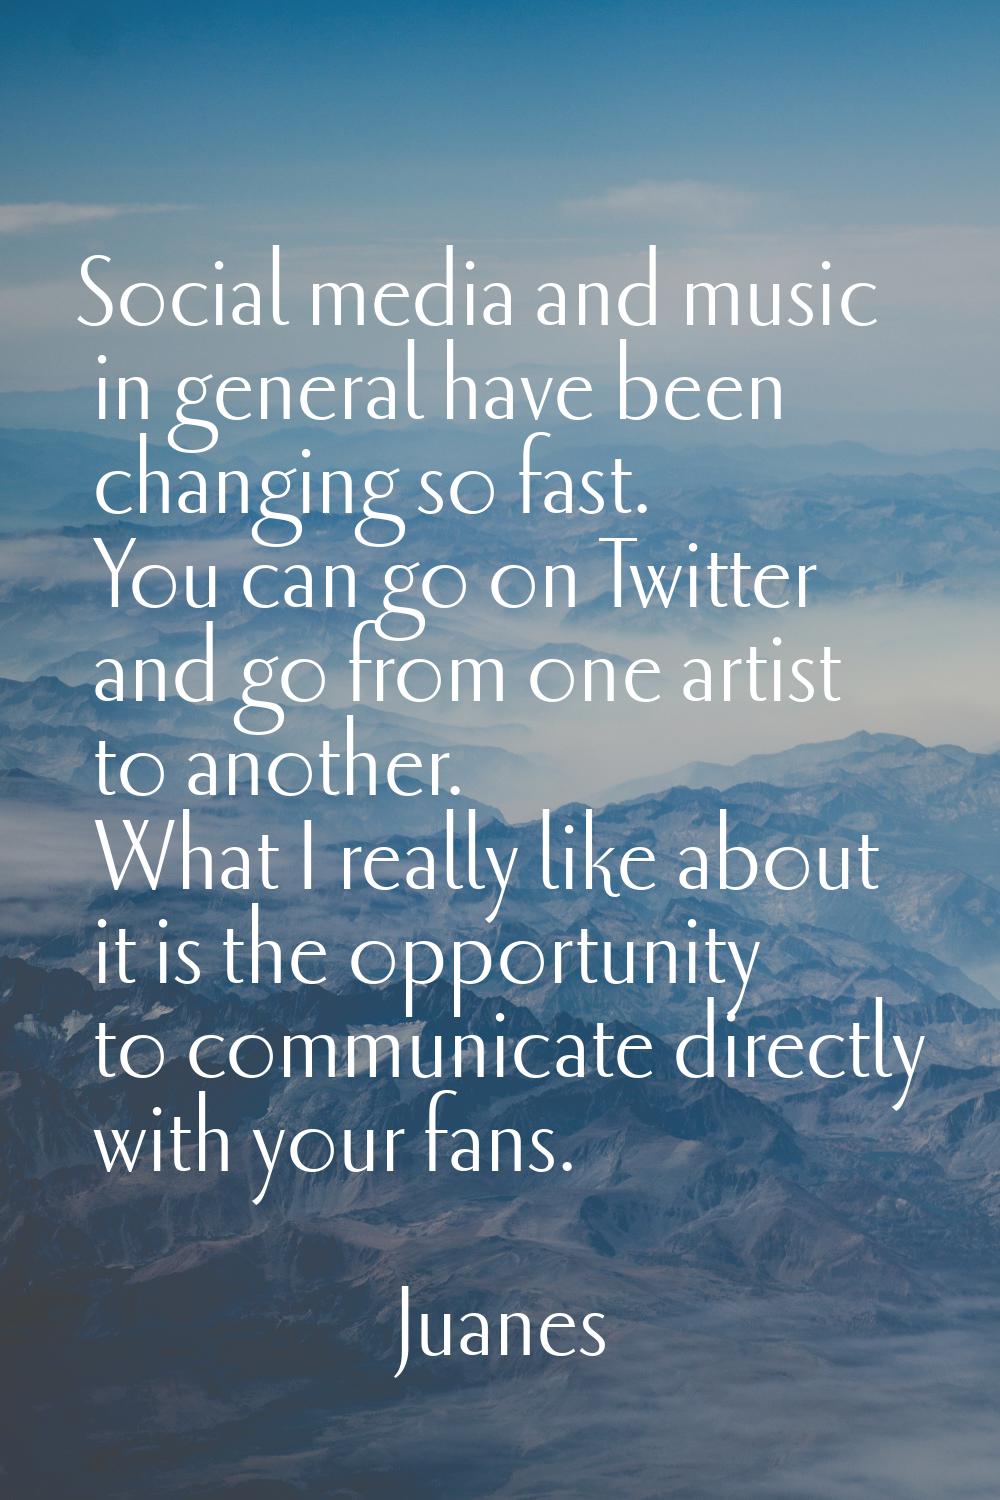 Social media and music in general have been changing so fast. You can go on Twitter and go from one